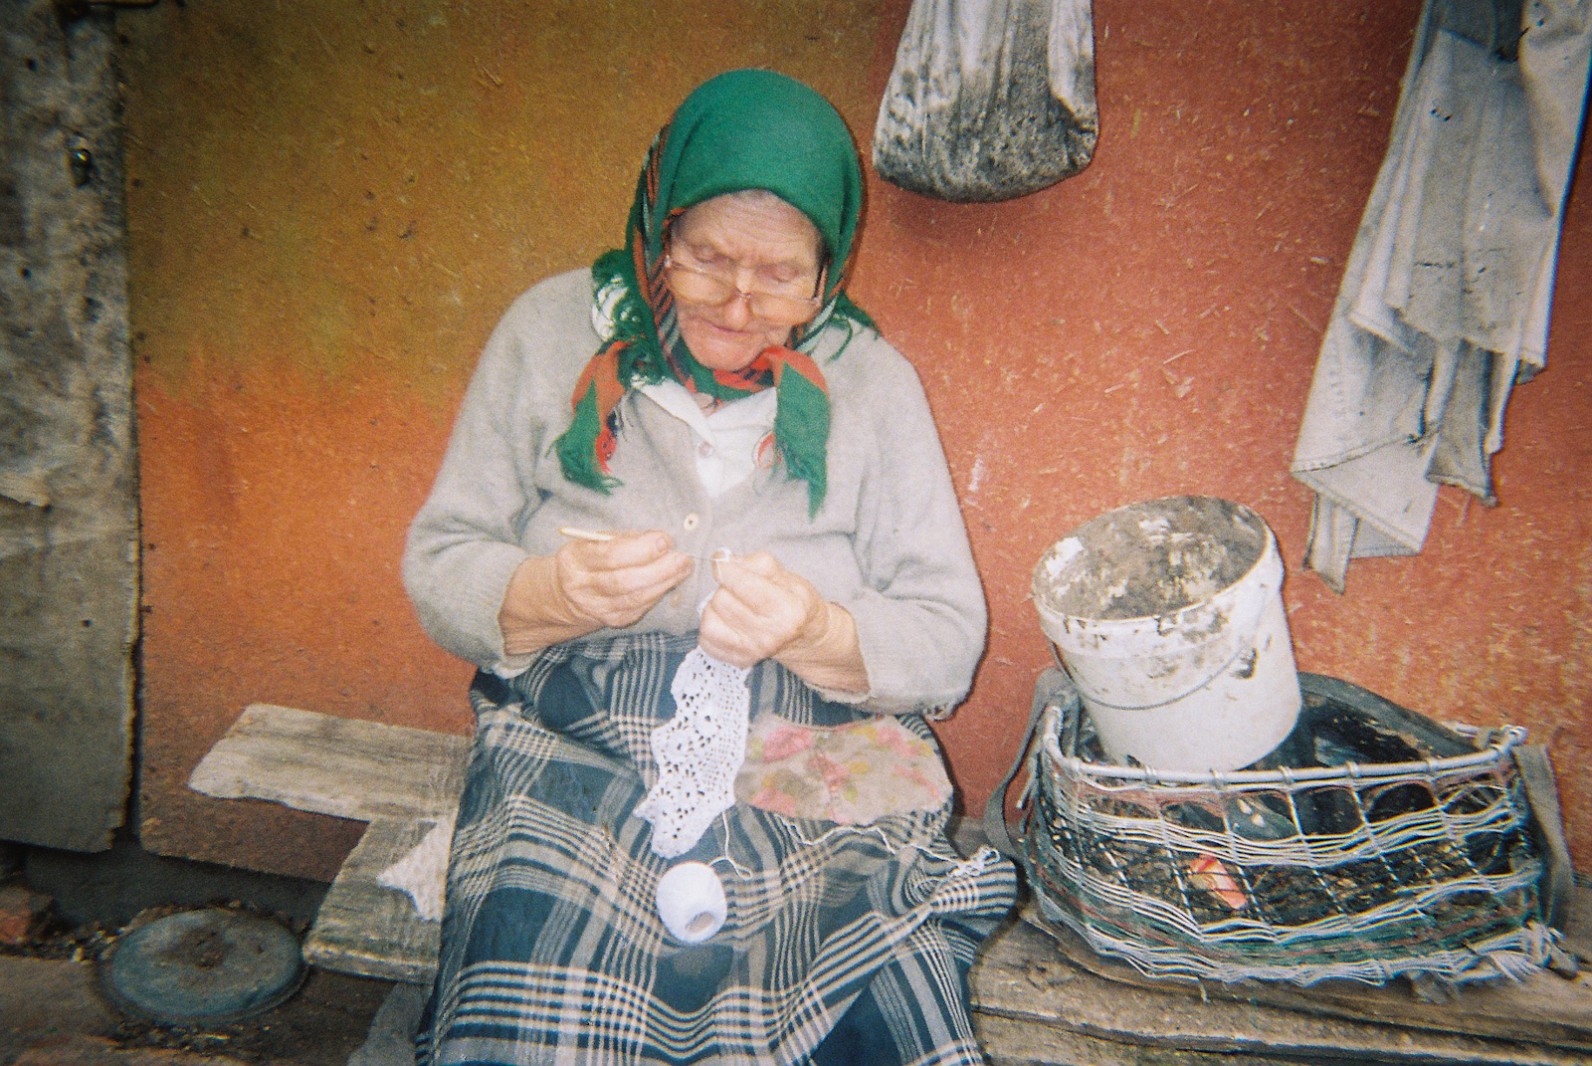 An elderly lady doing embroidery outside her  rural home